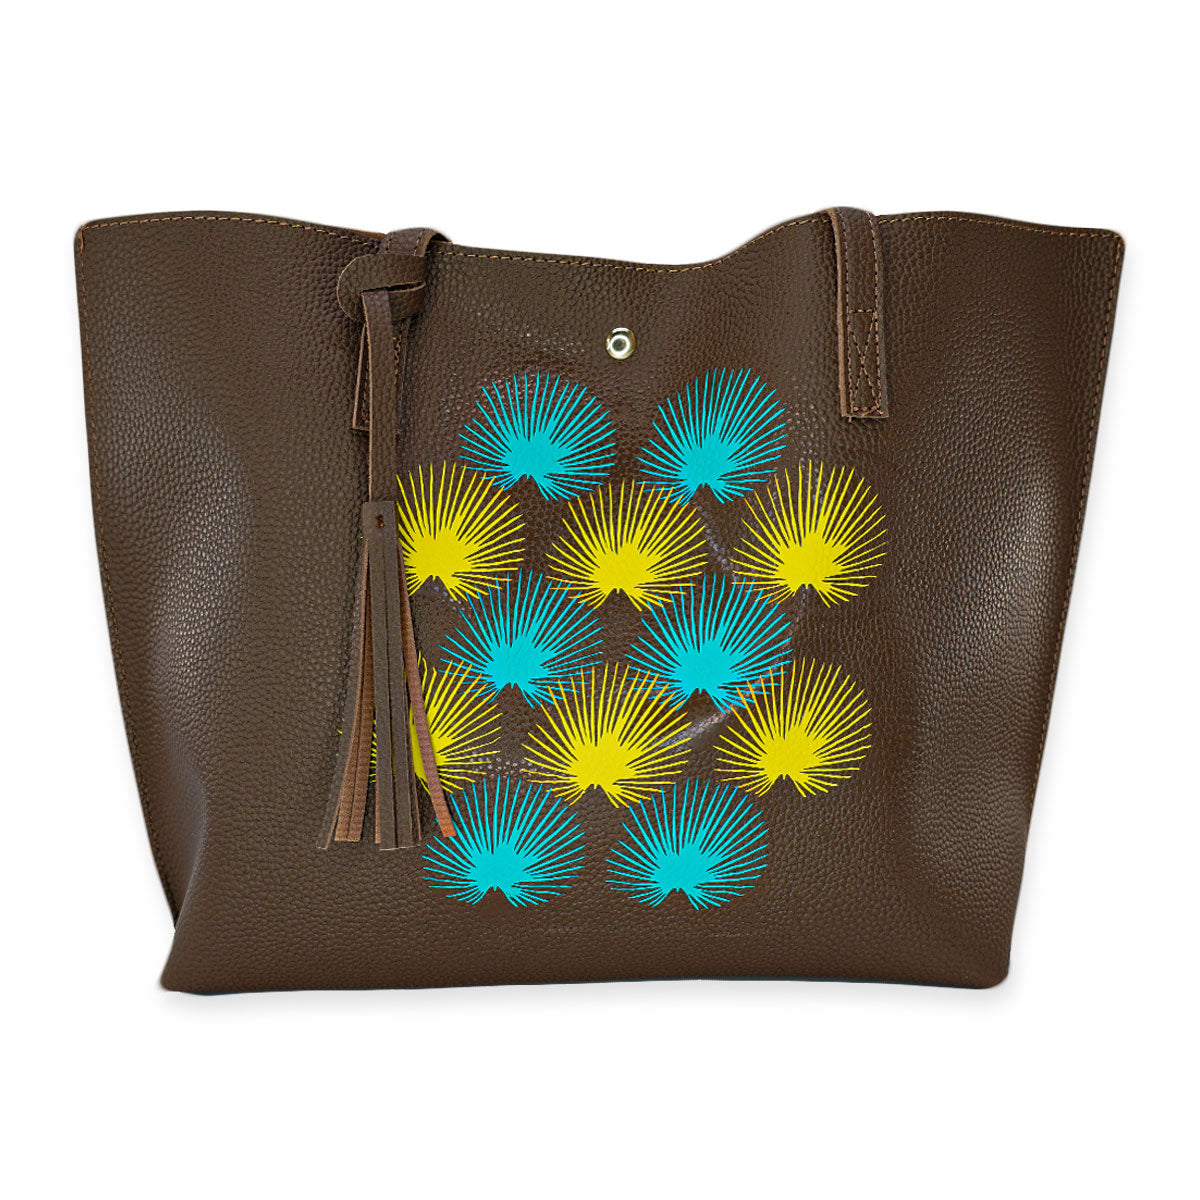 Faux Pebbled Leather Everyday Brown Tote Bag - Kūlia Yellow & Teal